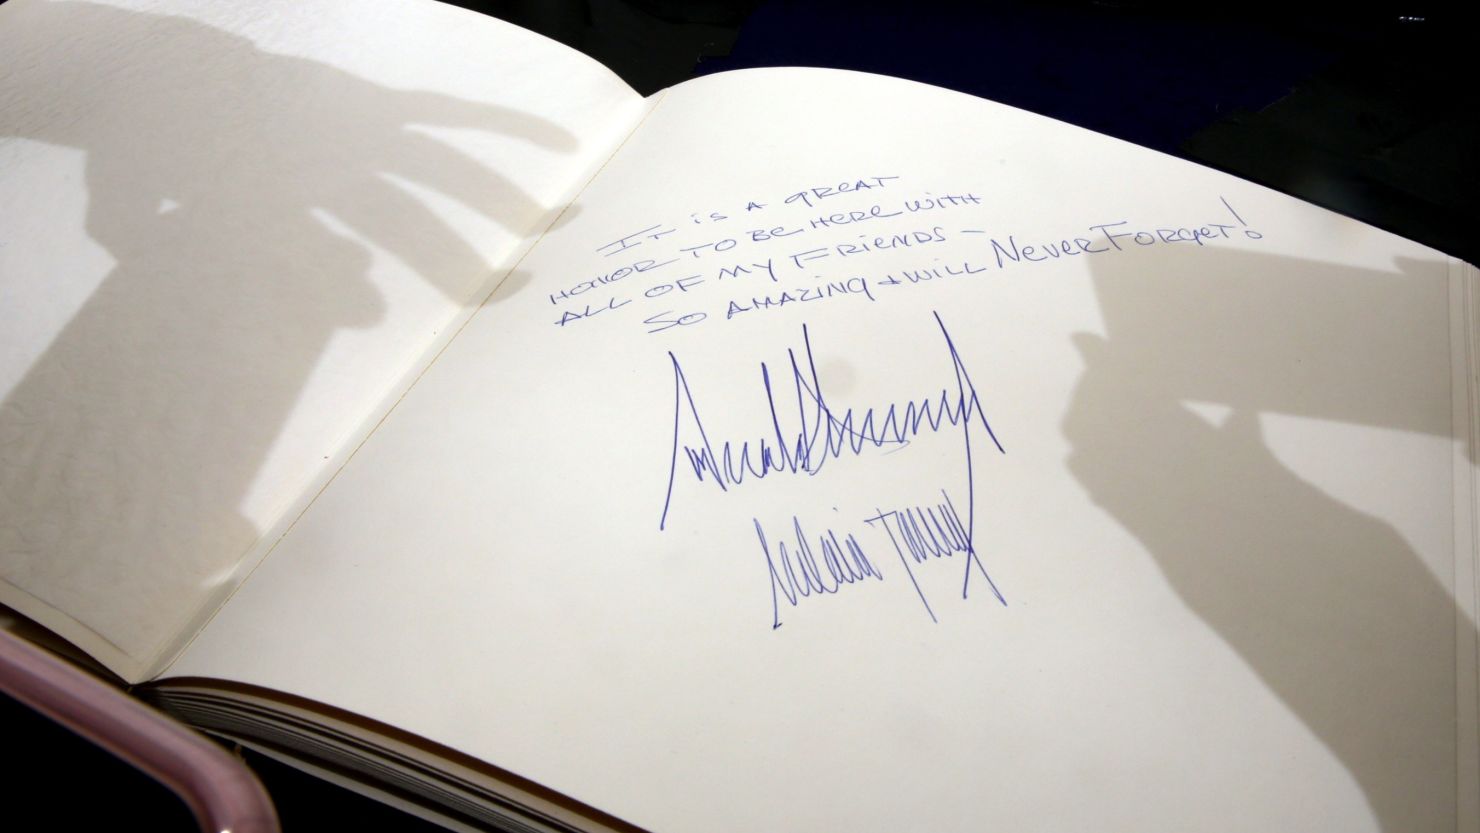 The message written by US President Donald Trump at the Yad Vashem Holocaust Memorial Museum guest book and signed by him and his wife Melania is seen after their visit on May 23, 2017, in Jerusalem. 